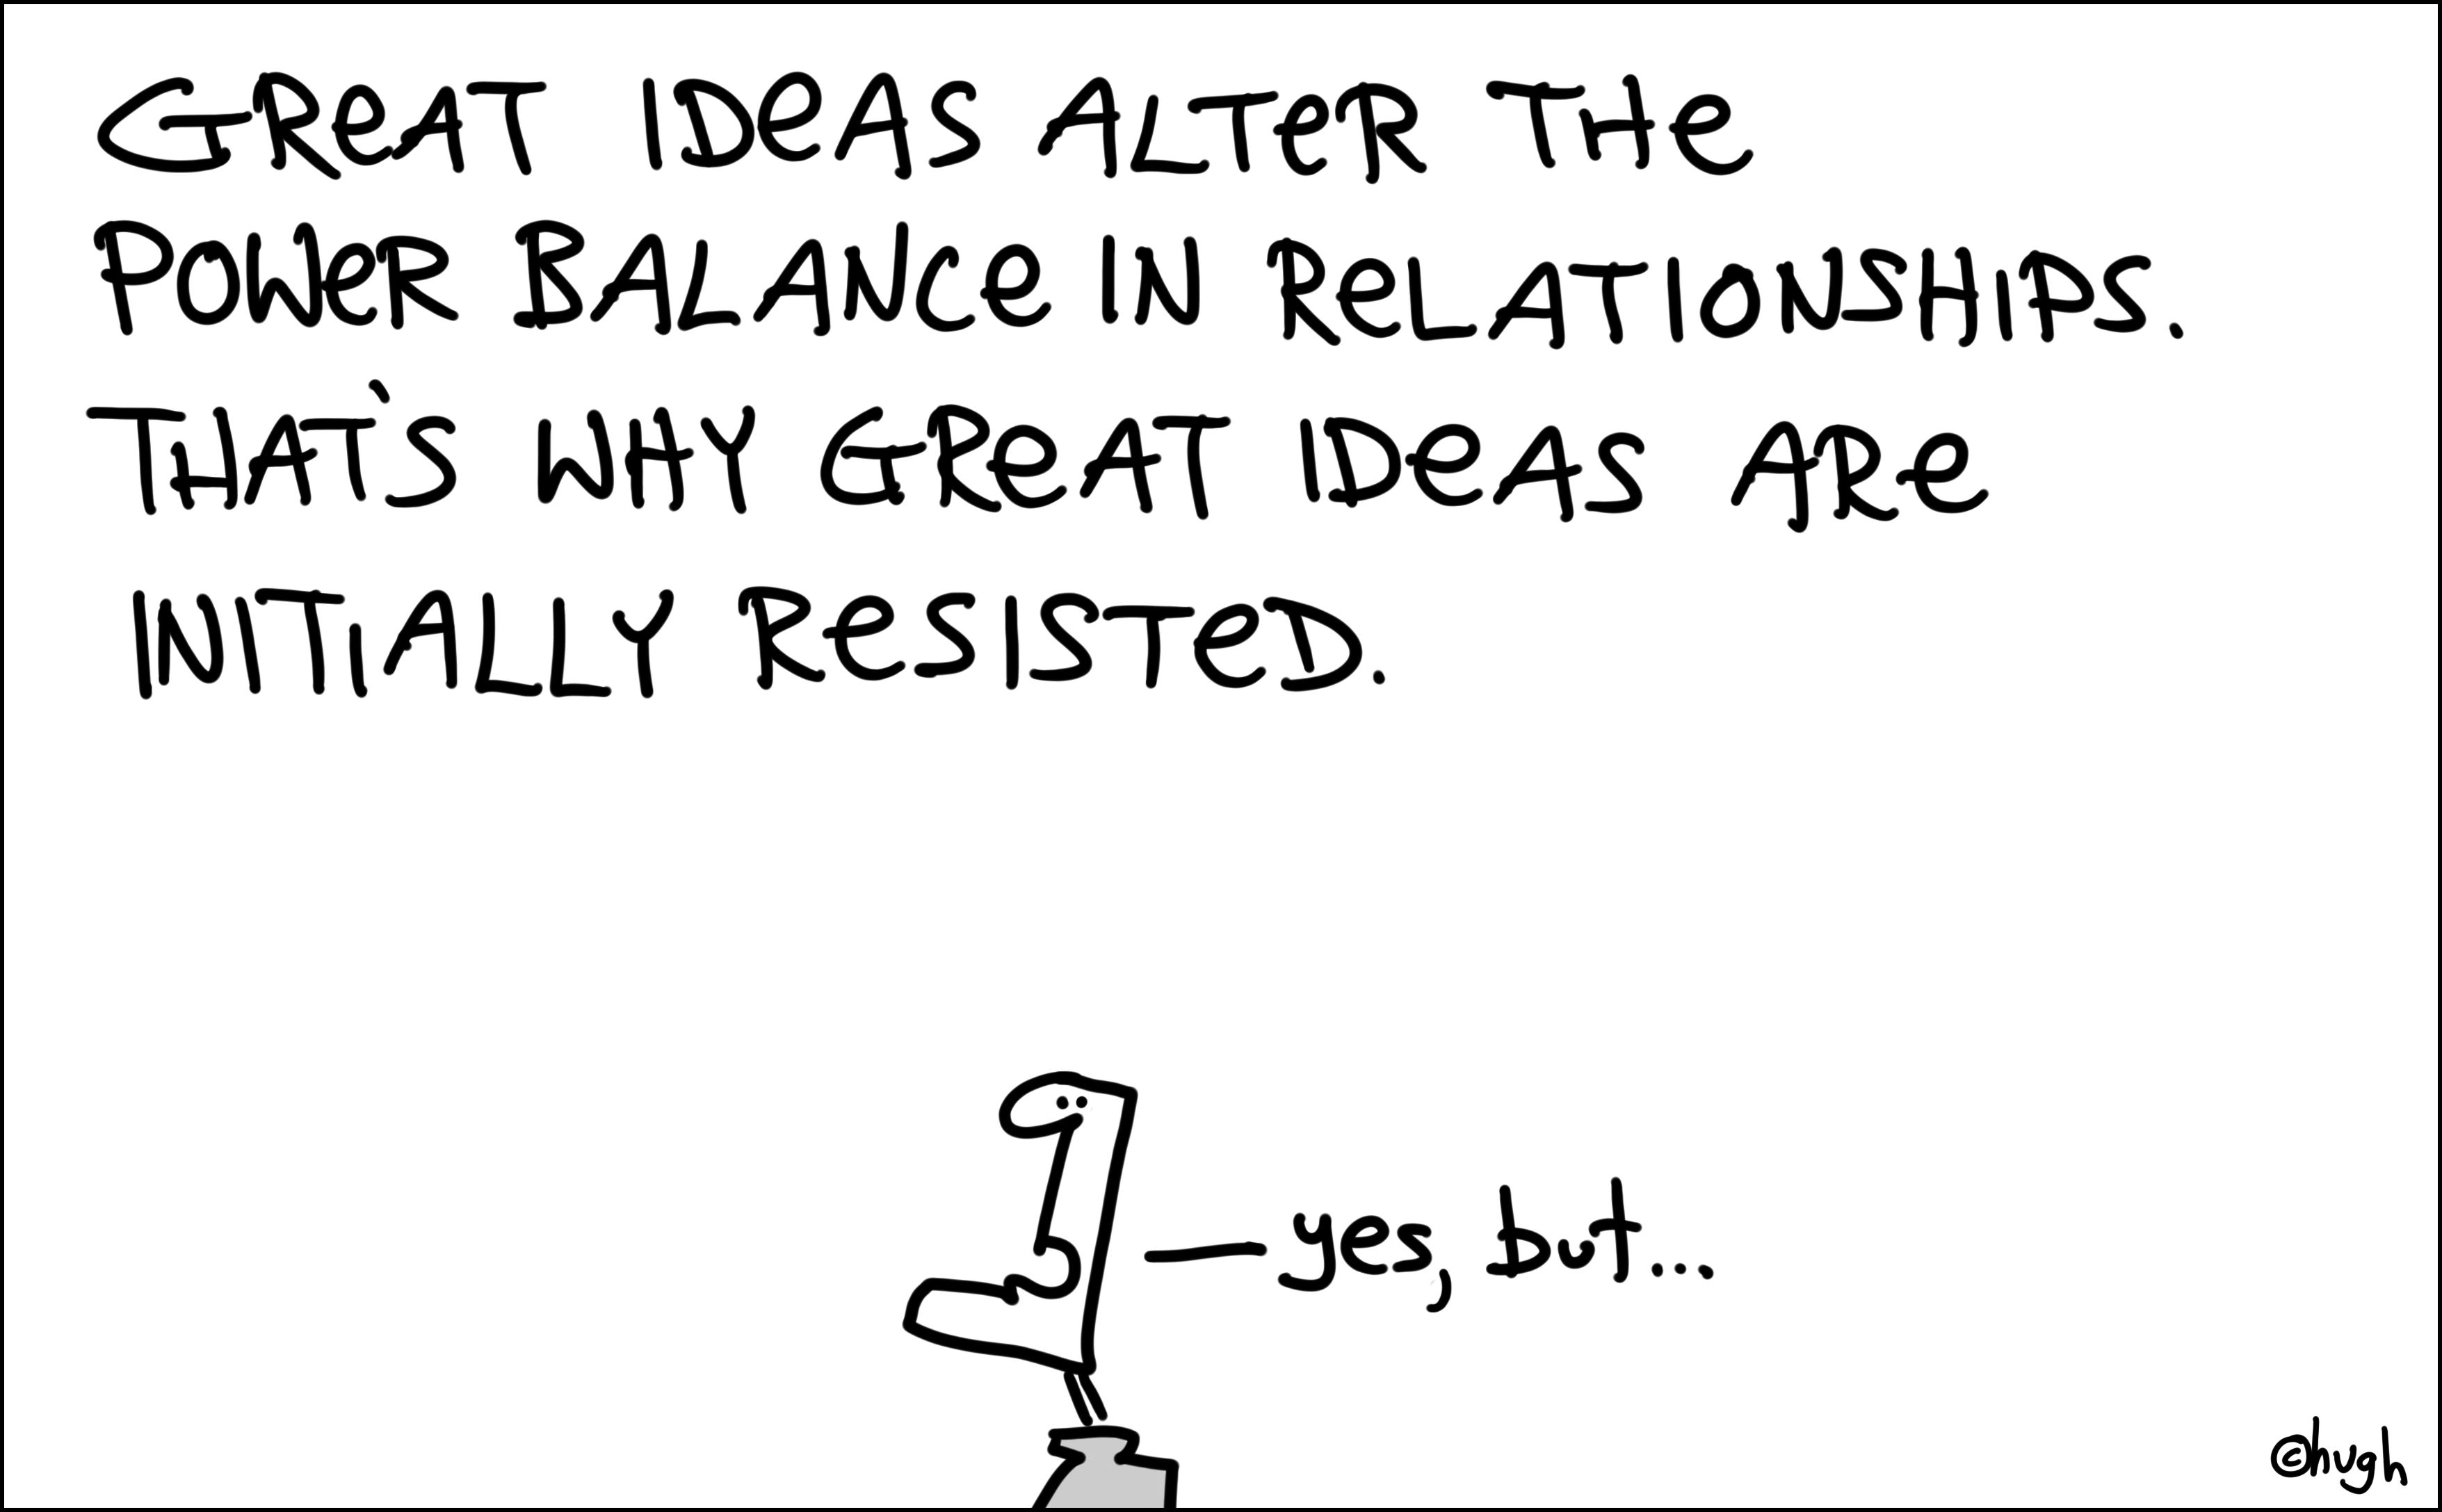 Great ideas alter the power balance in relationships. That’s why great ideas are initially resisted